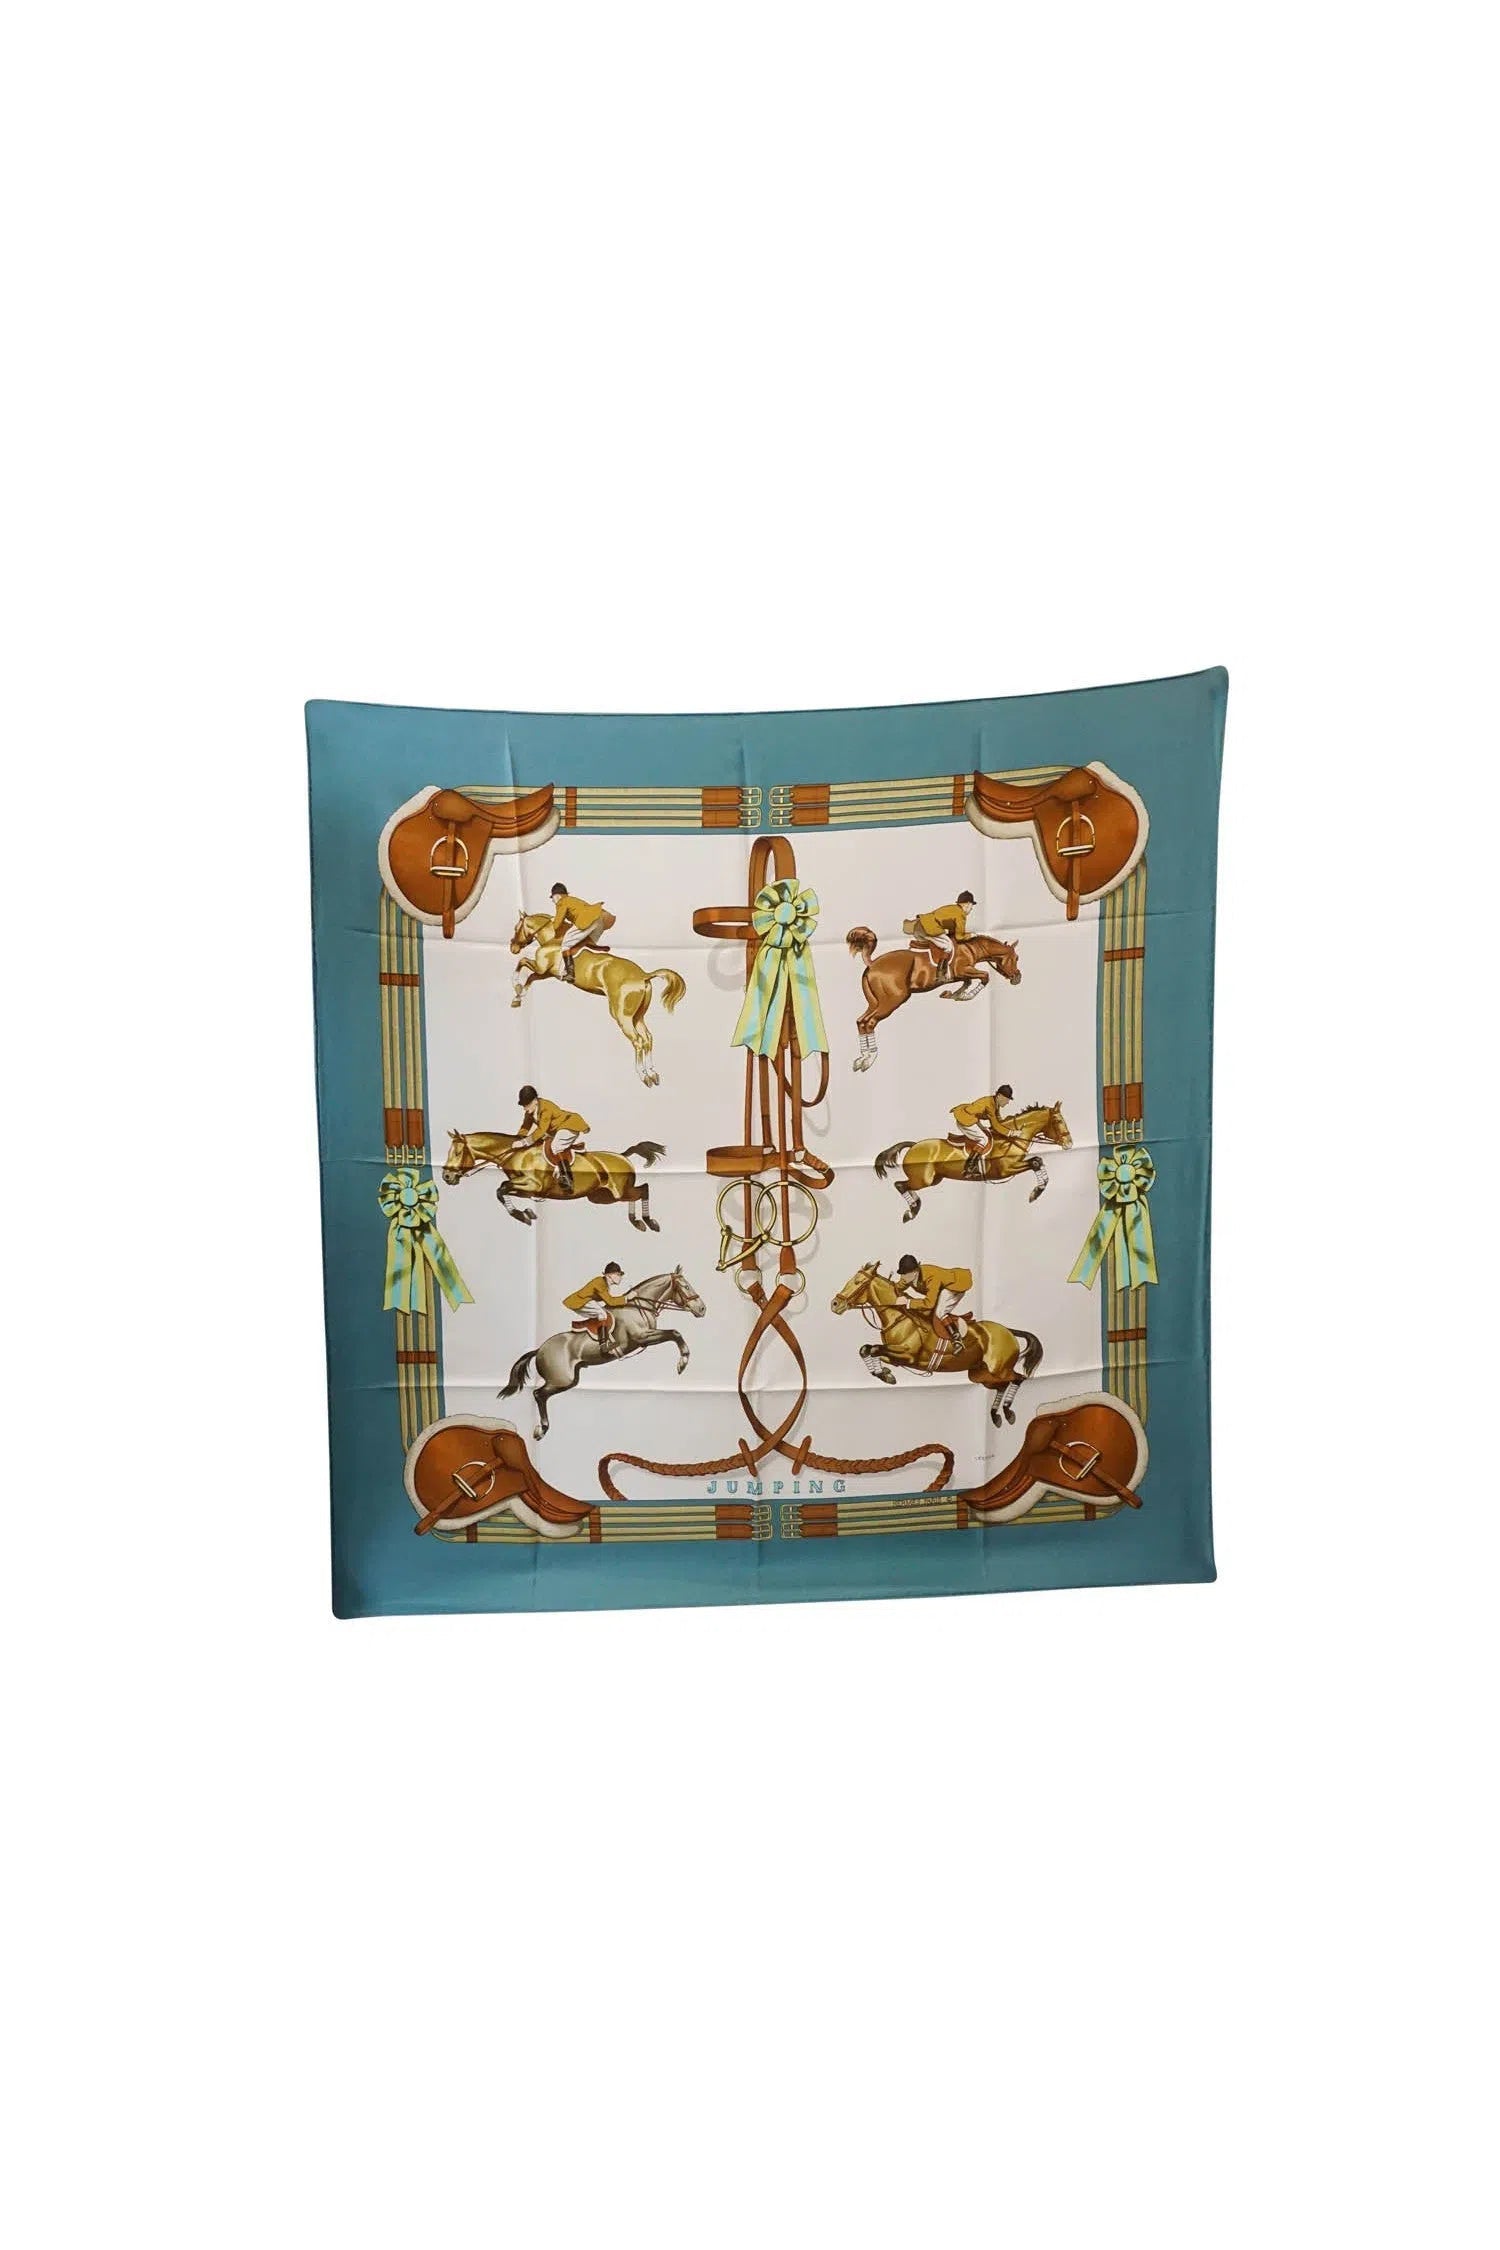 Hermès Light Blue and Brown Jumping Horse Scarf 90cm - Foxy Couture Carmel